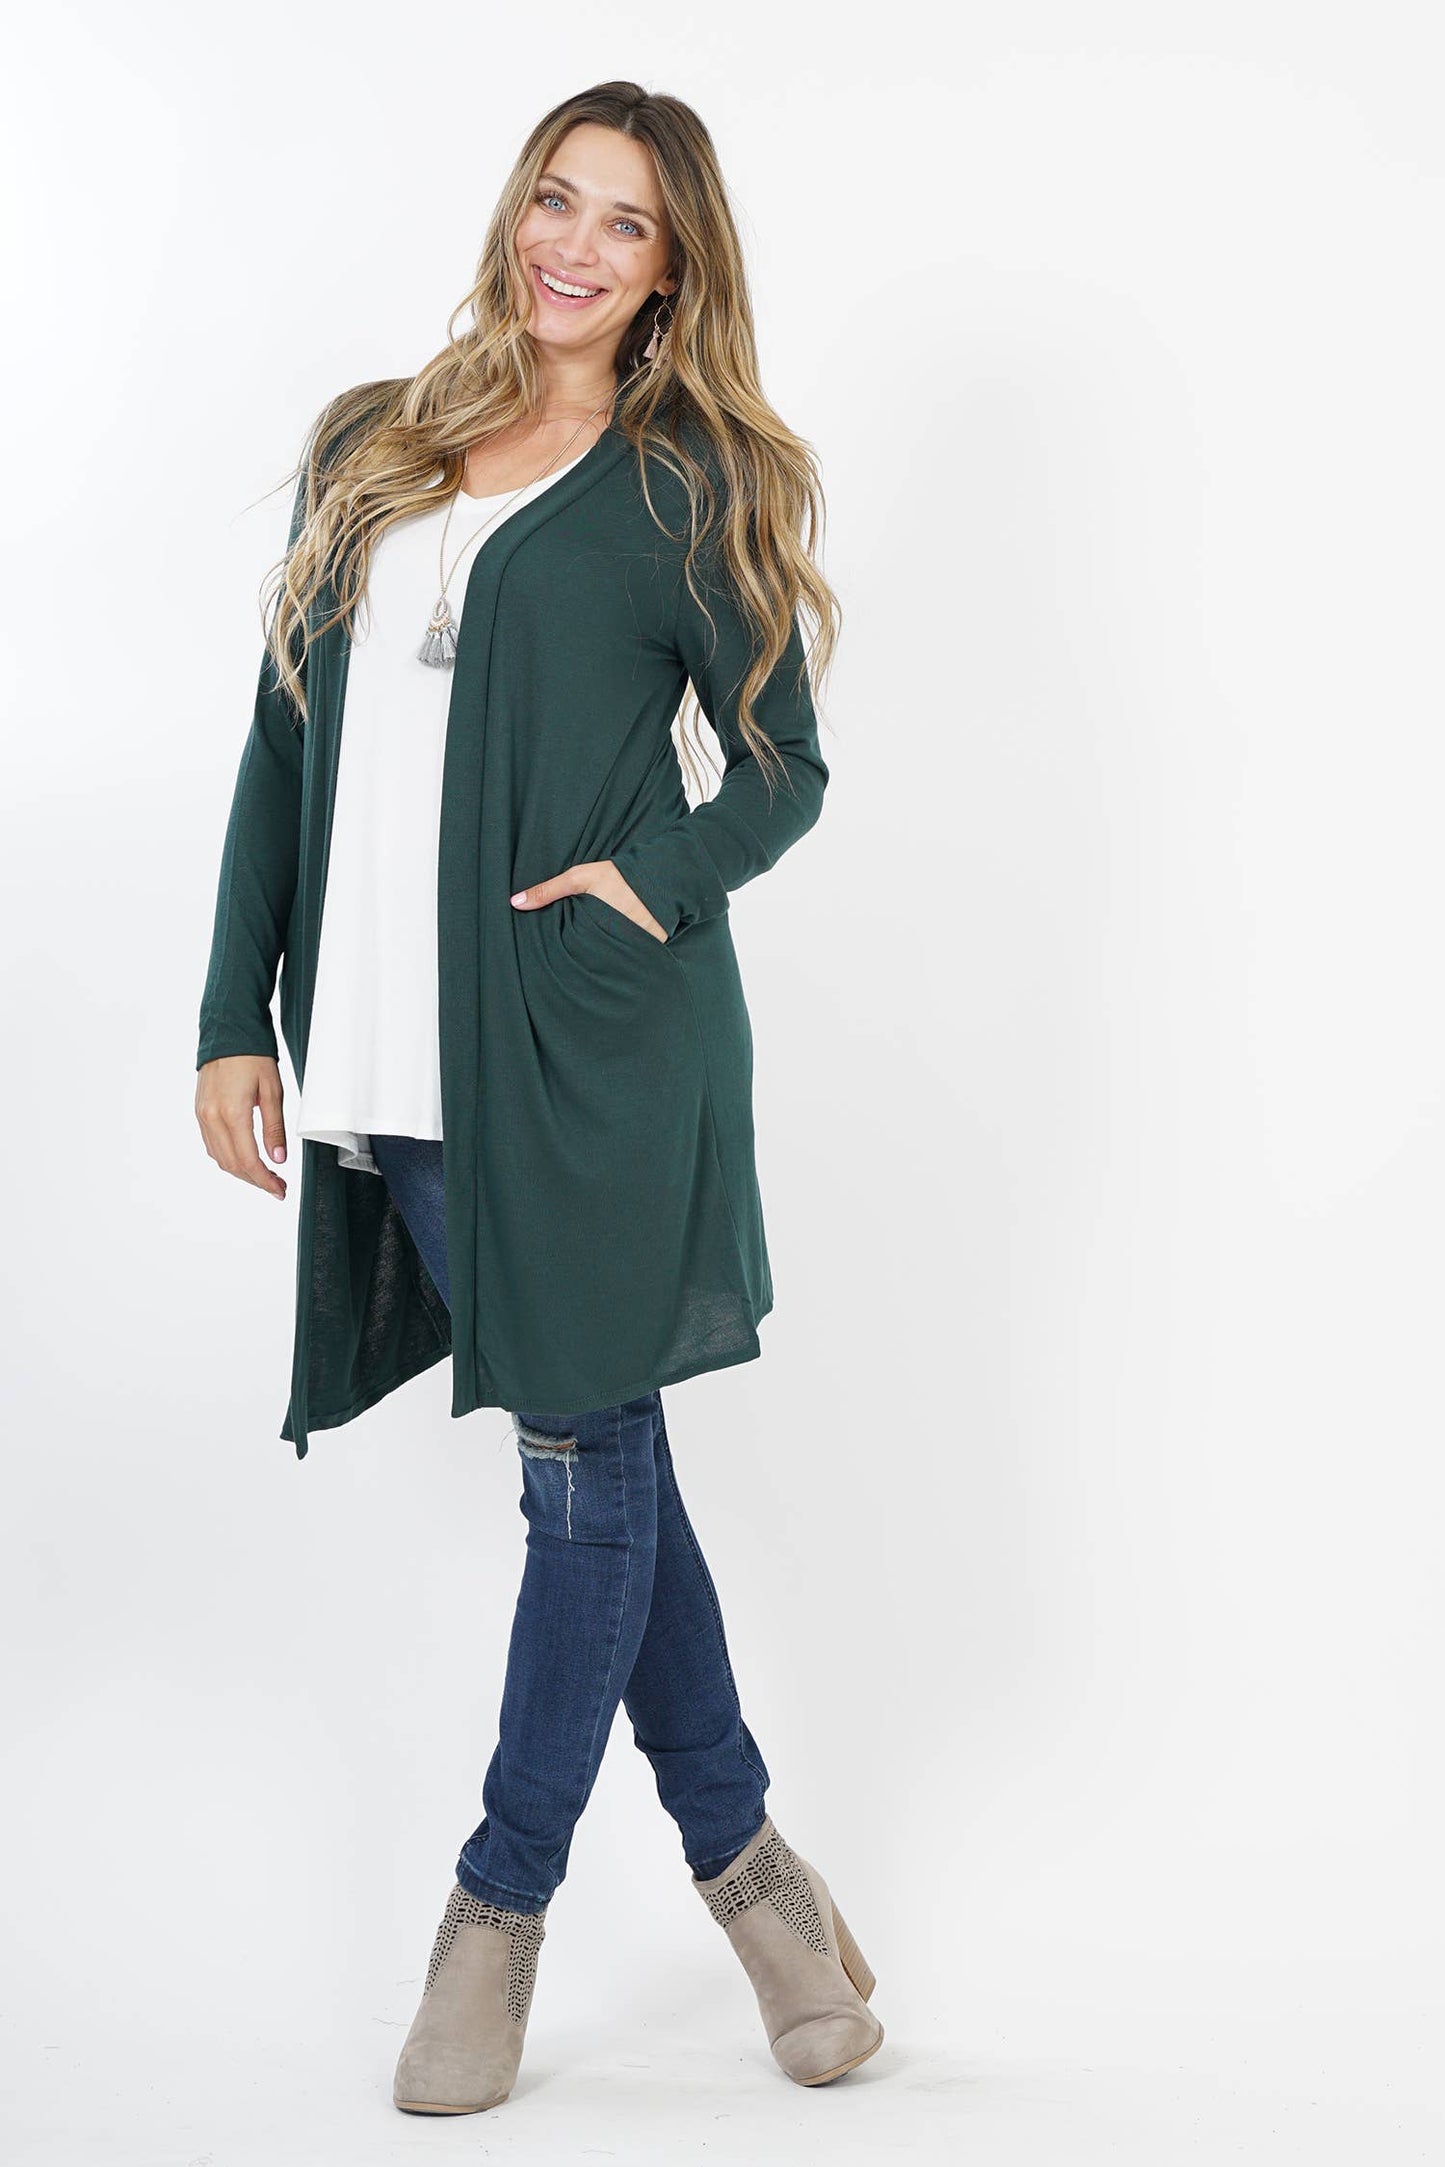 HUNTER GREEN PLUS SIZE SWEATER OPEN CARDIGAN WITH SIDE POCKETS